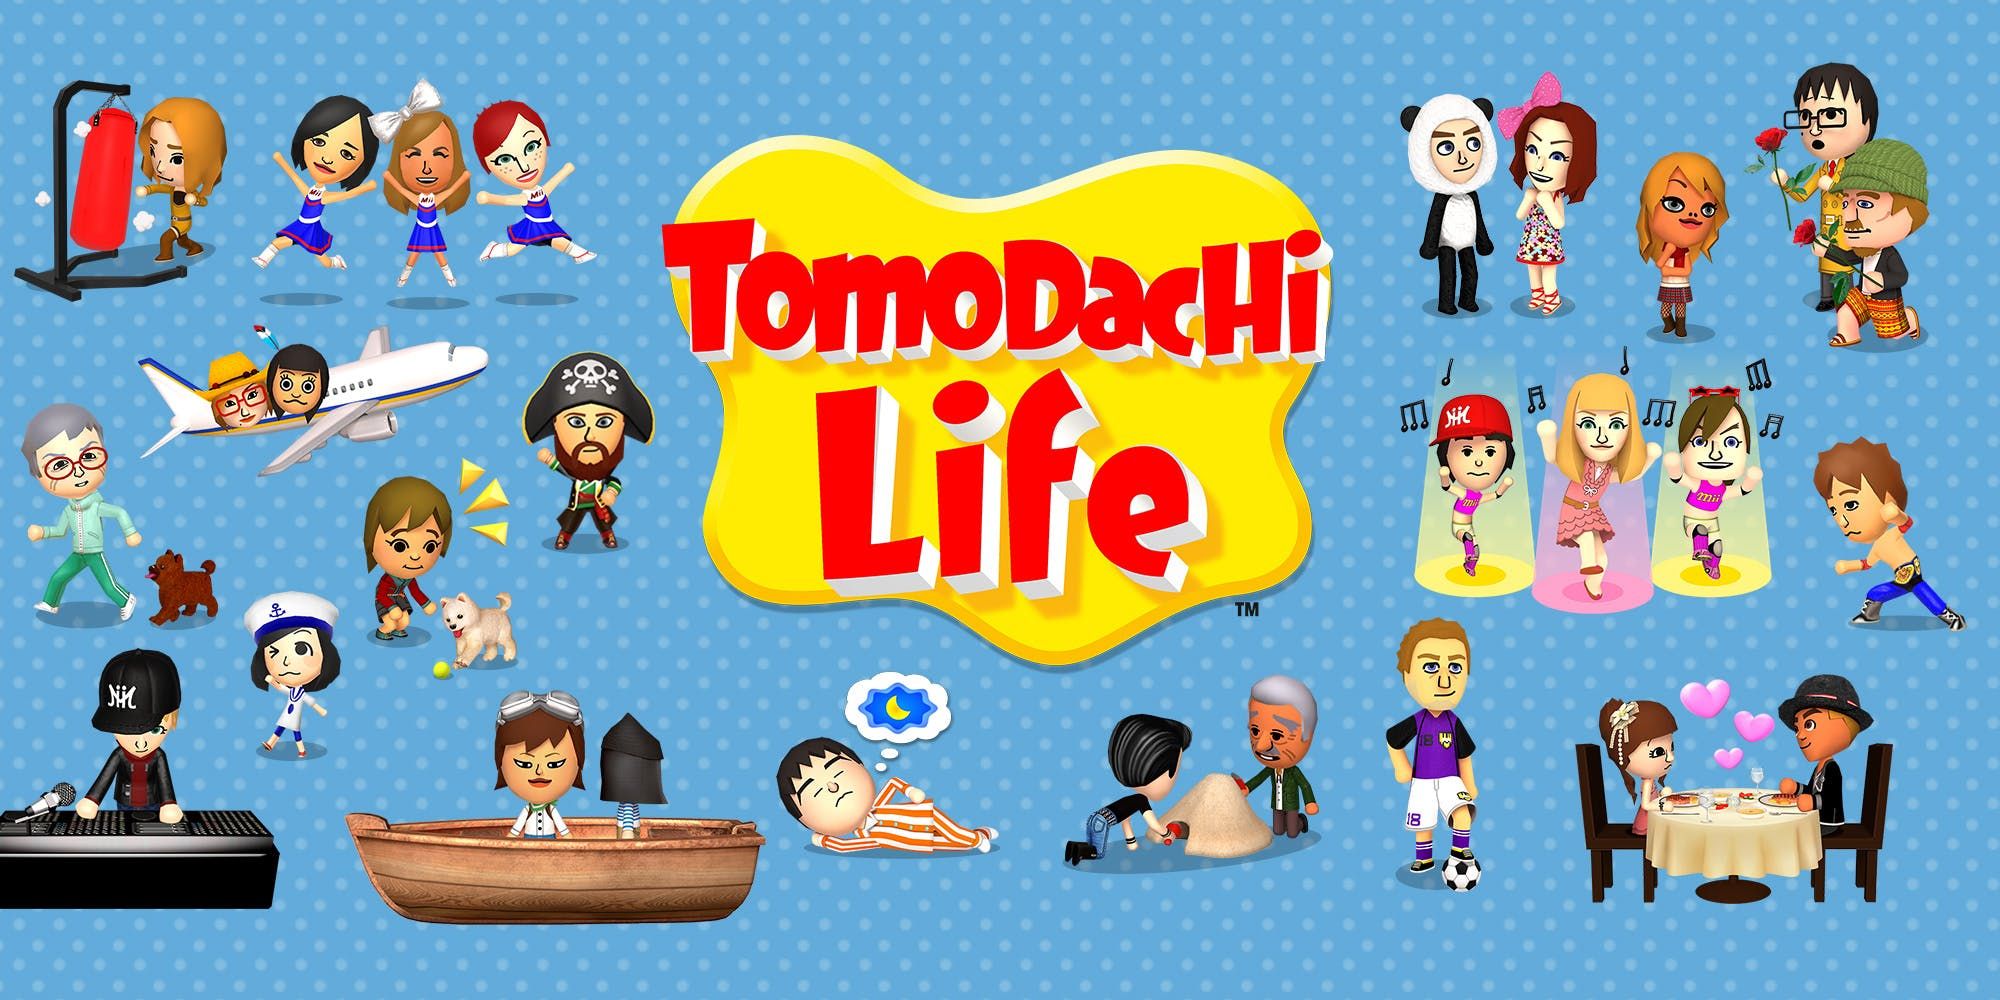 Tomodachi Life - Many Miis Hang Out An Mingle With Each Other